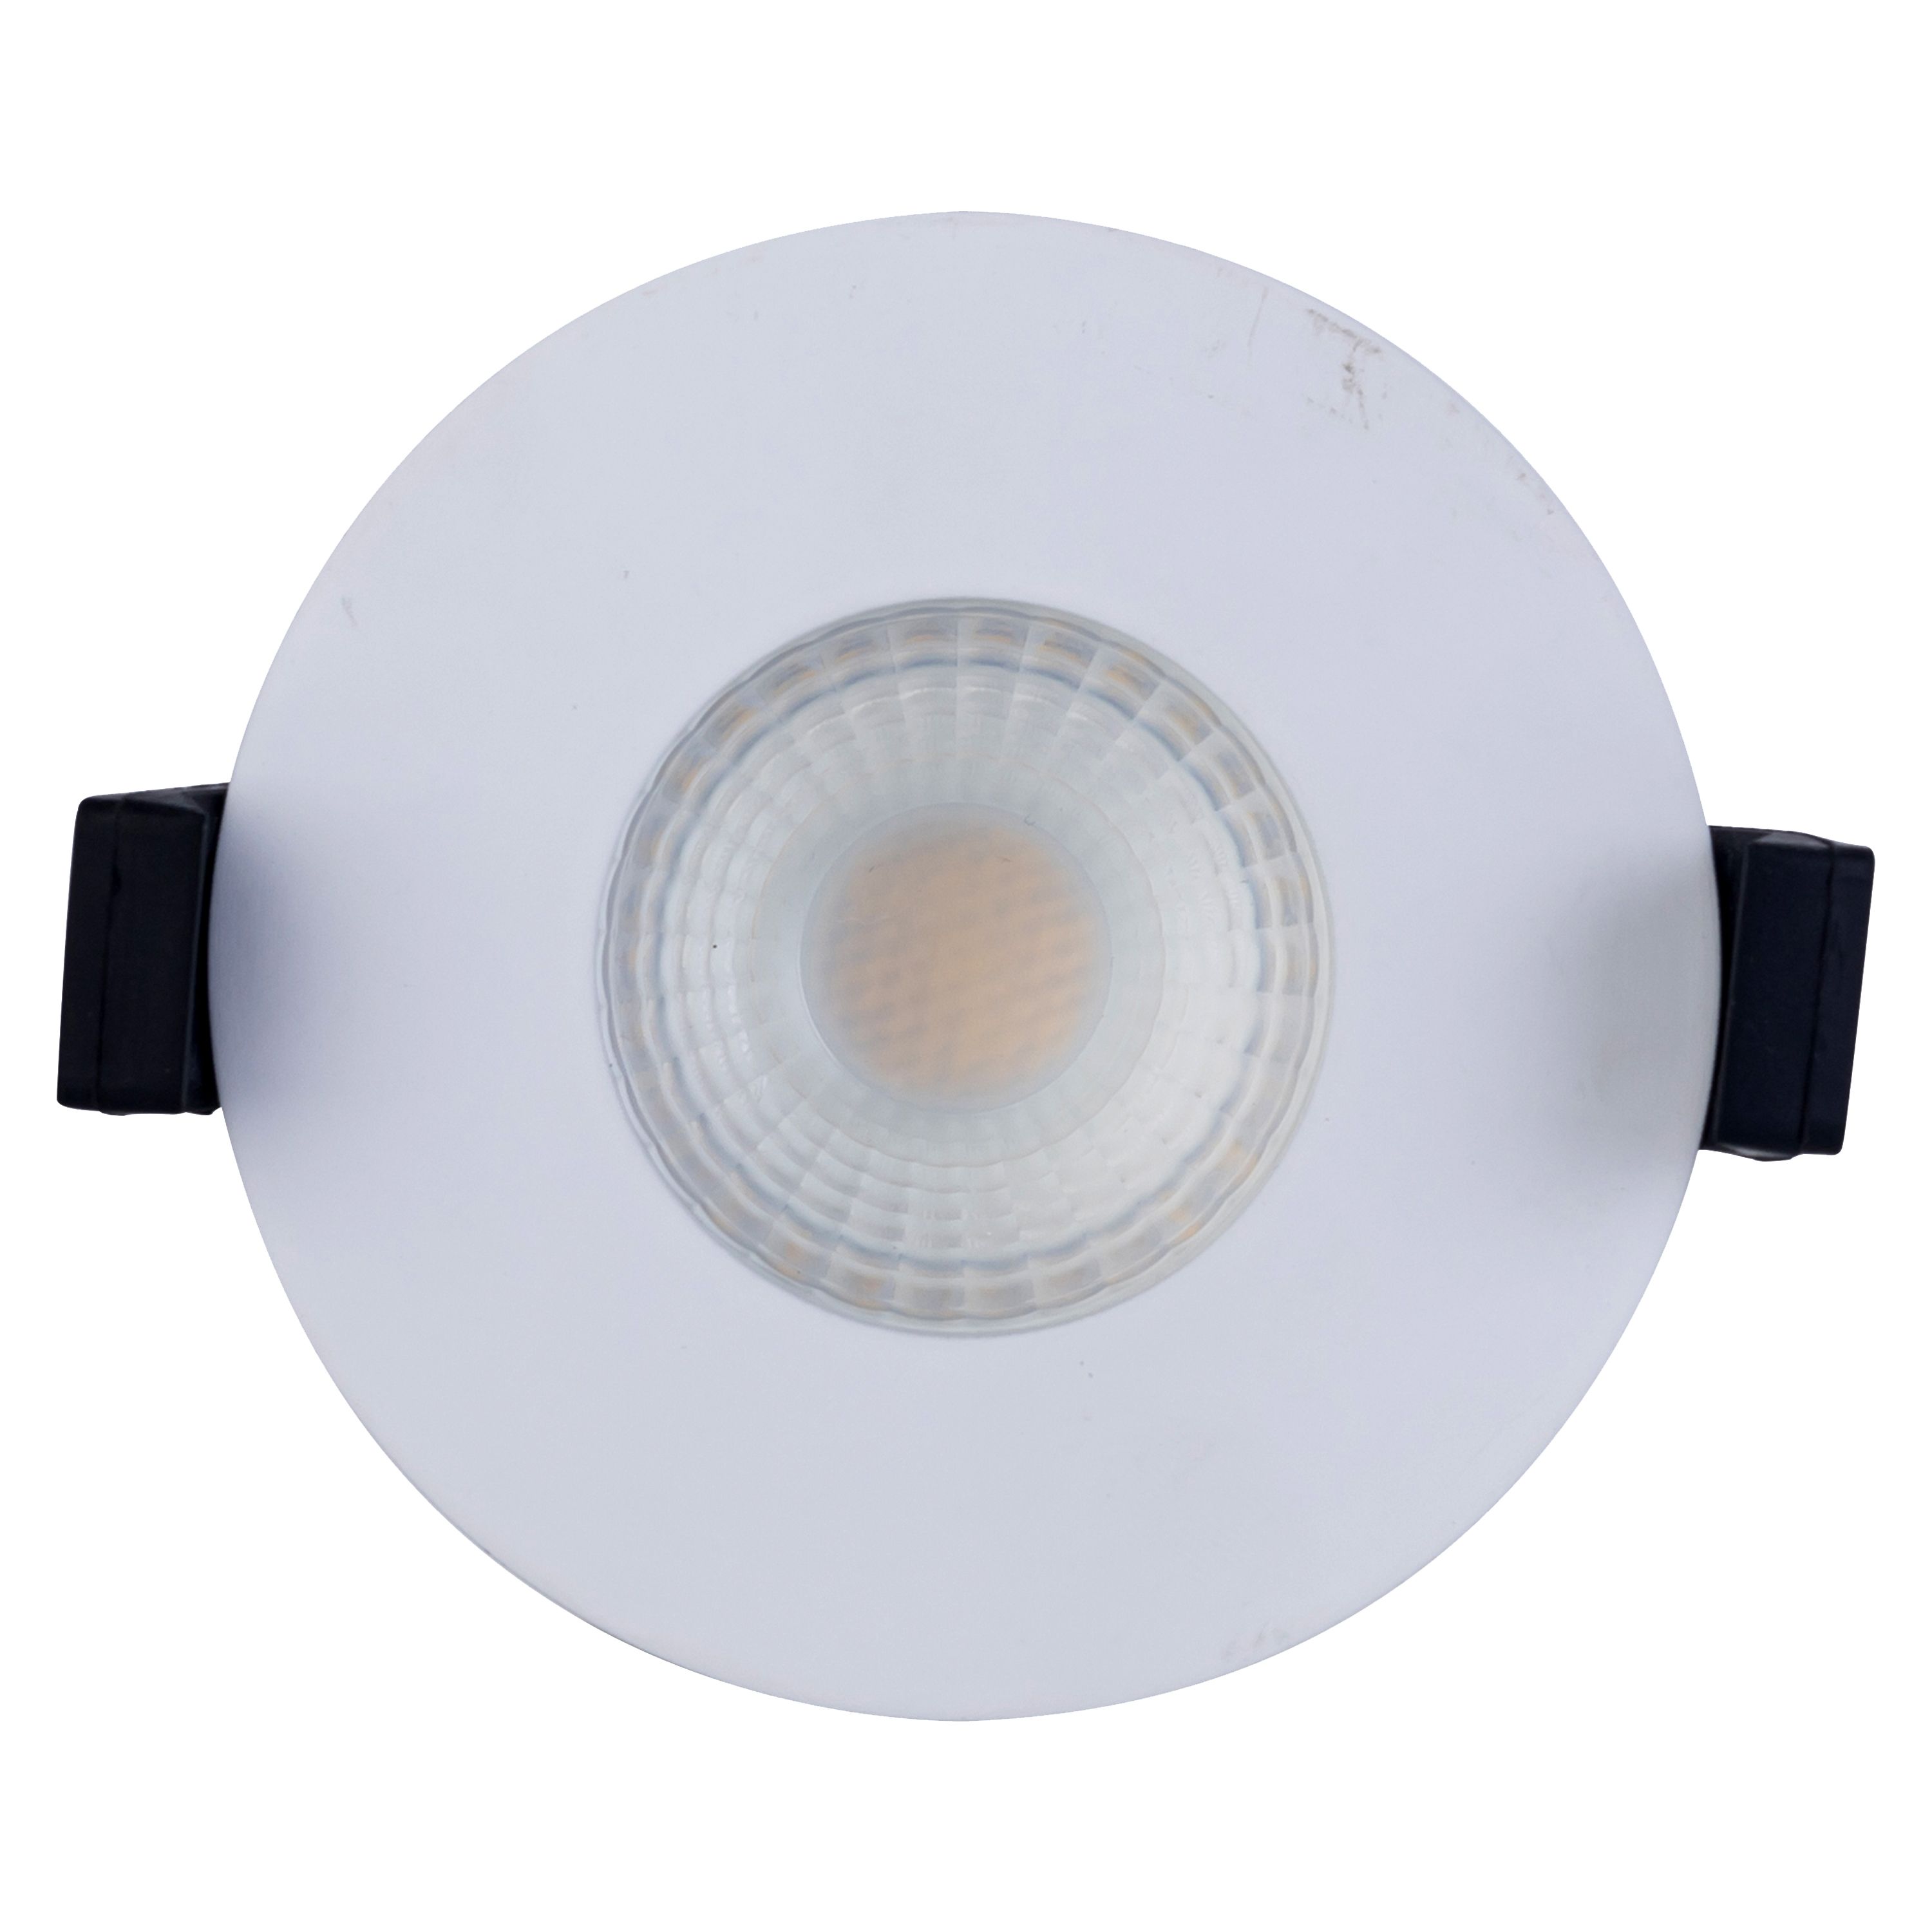 Luceco Matt White Fixed LED Fire-rated Cool white Downlight 6W IP65, Pack of 6